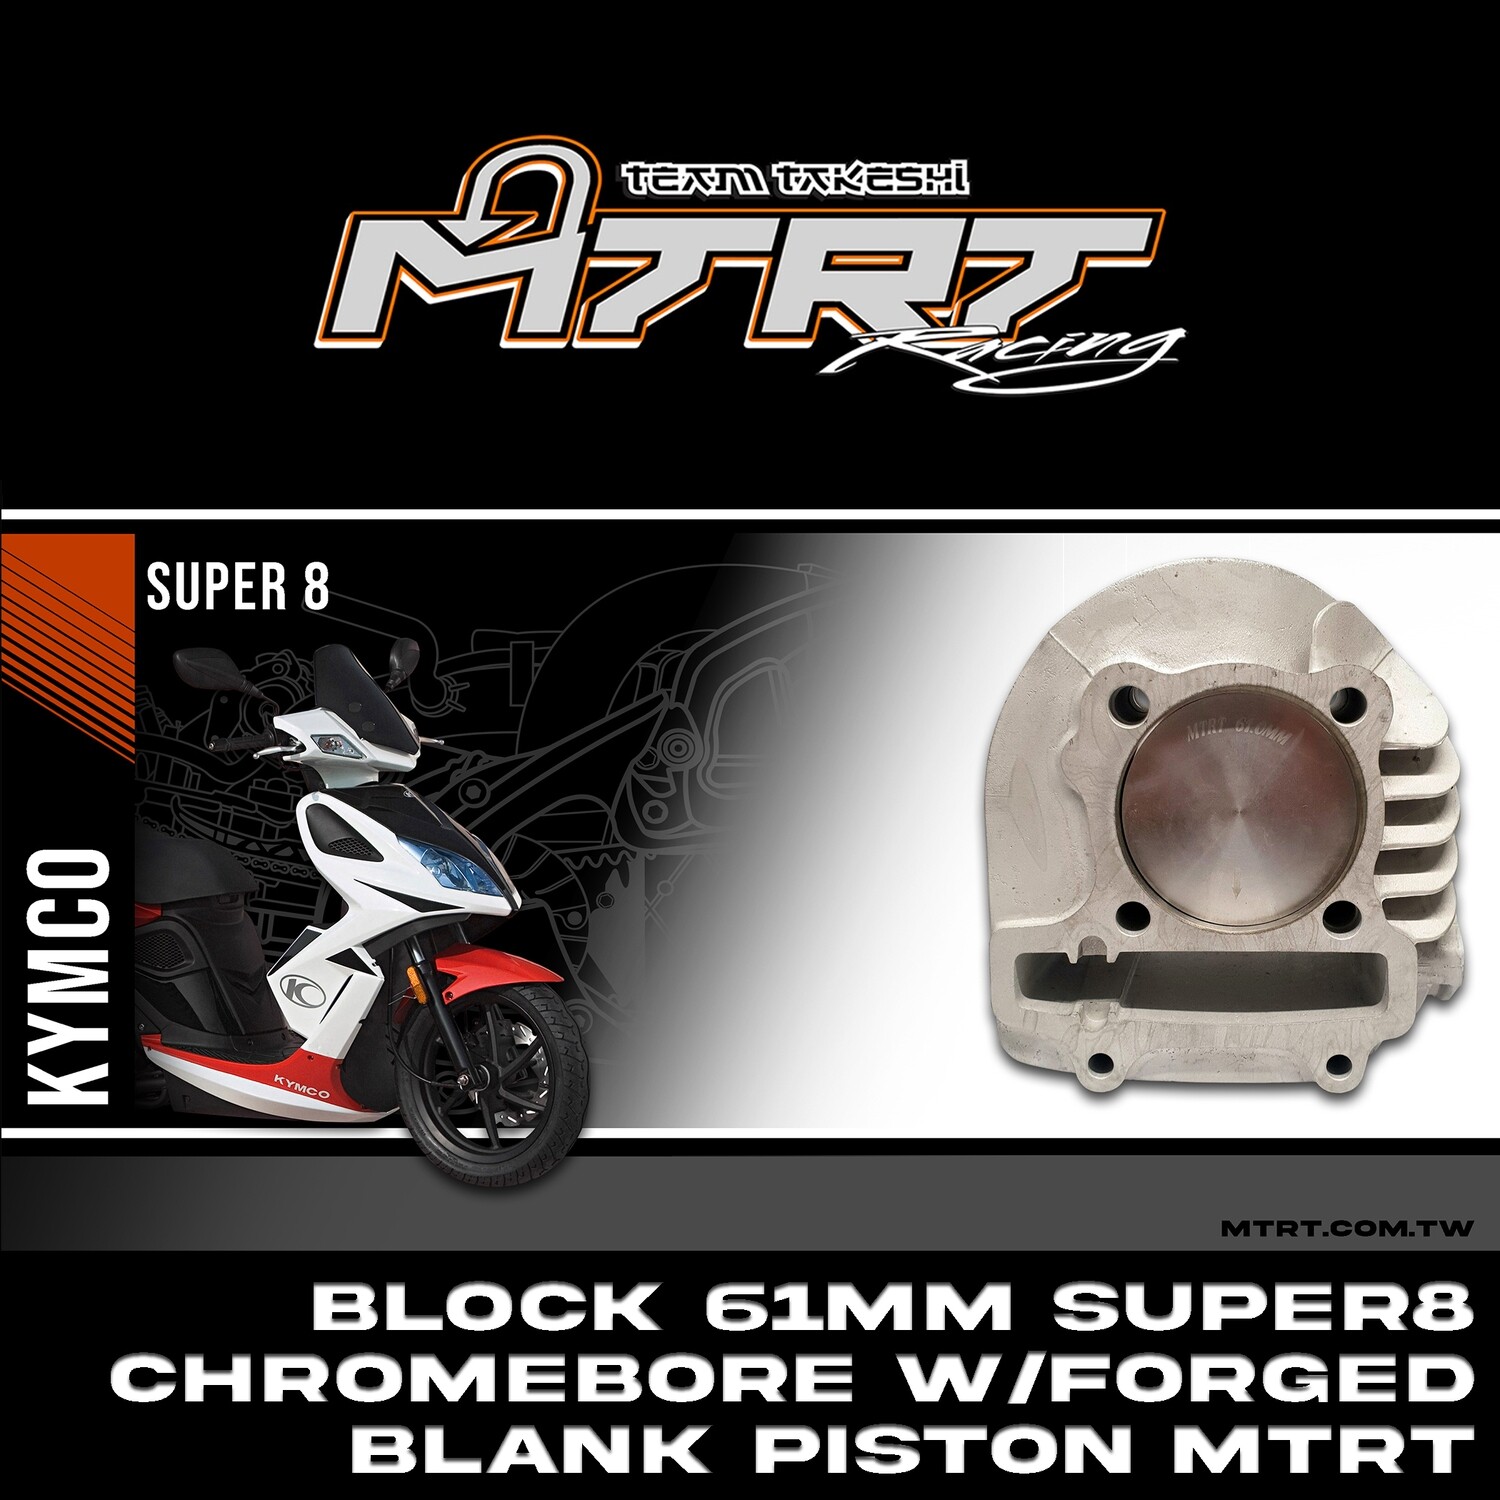 61MM SUPER8 Chromebore Block with Forged Blank Piston MTRT